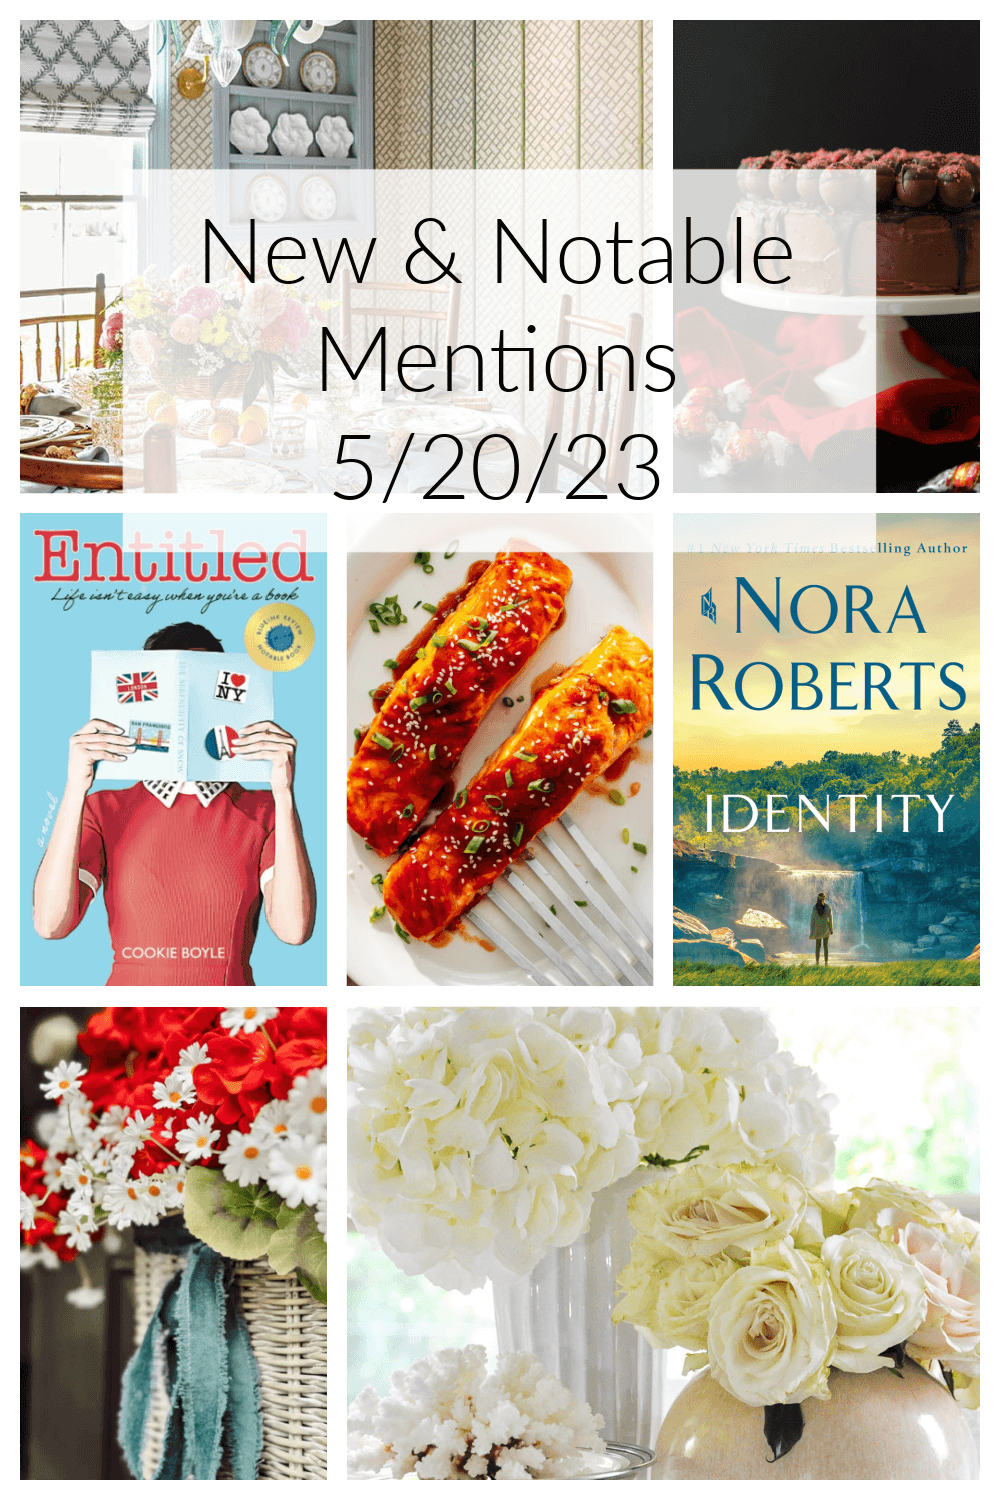 New & Notable Mentions 5/20/23